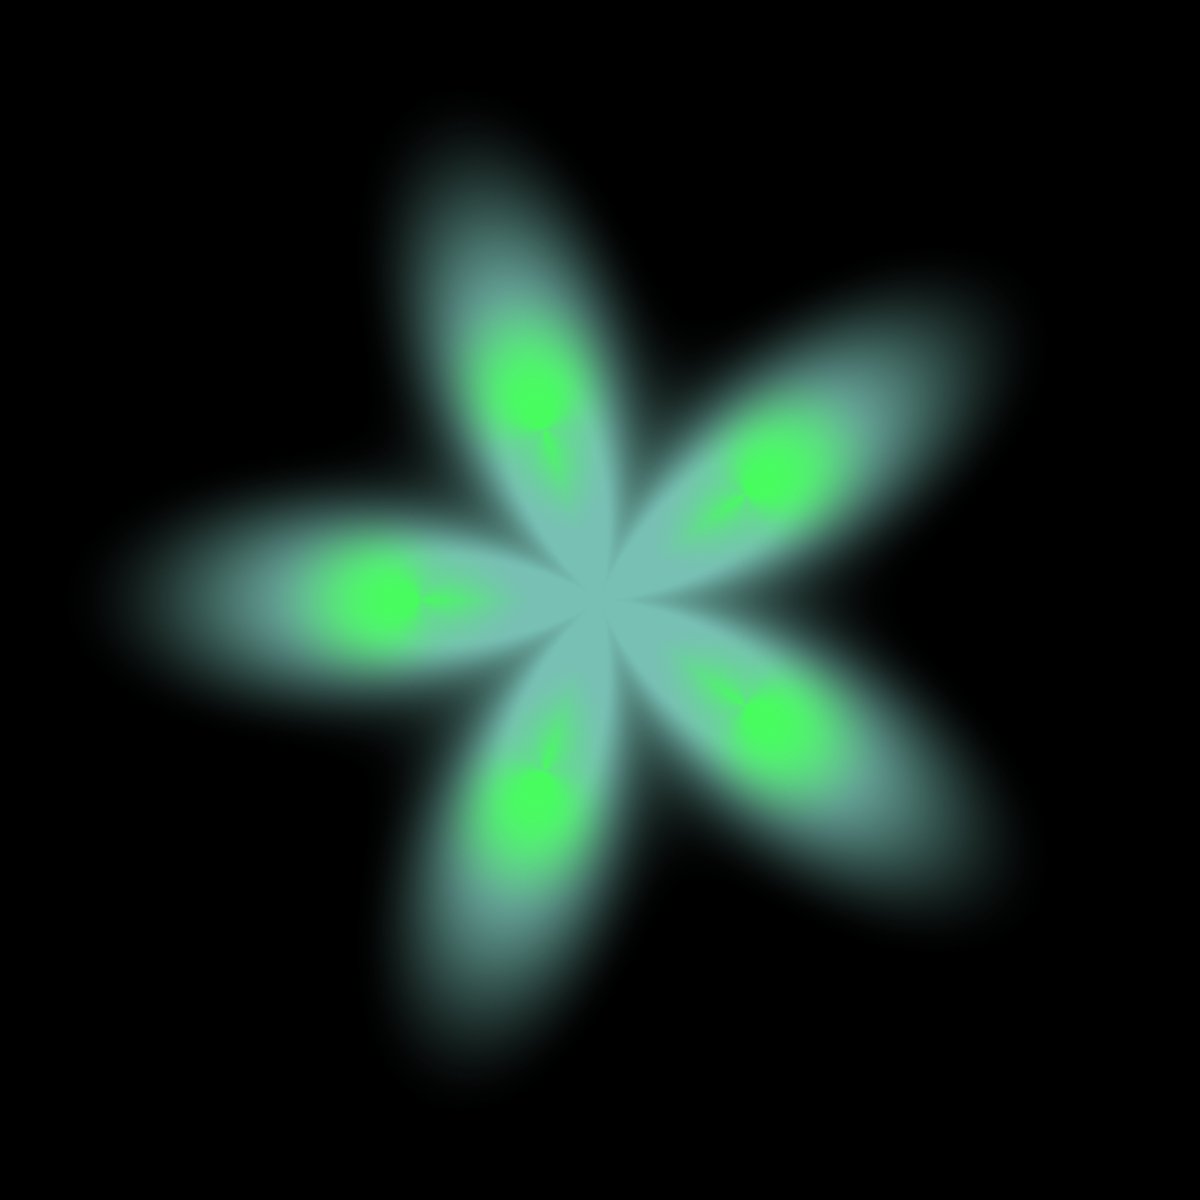 {'name': 'Perennial #1556', 'attributes': [{'trait_type':'Type', 'value': 'Symmetric'},{'trait_type':'Petals','value': '5'},{'trait_type': 'Shape','value': 'Rounded'},{'trait_type': 'Accord','value': 'Emerald'},{'trait_type': 'Markings','value': 'Apple Flare'}]}